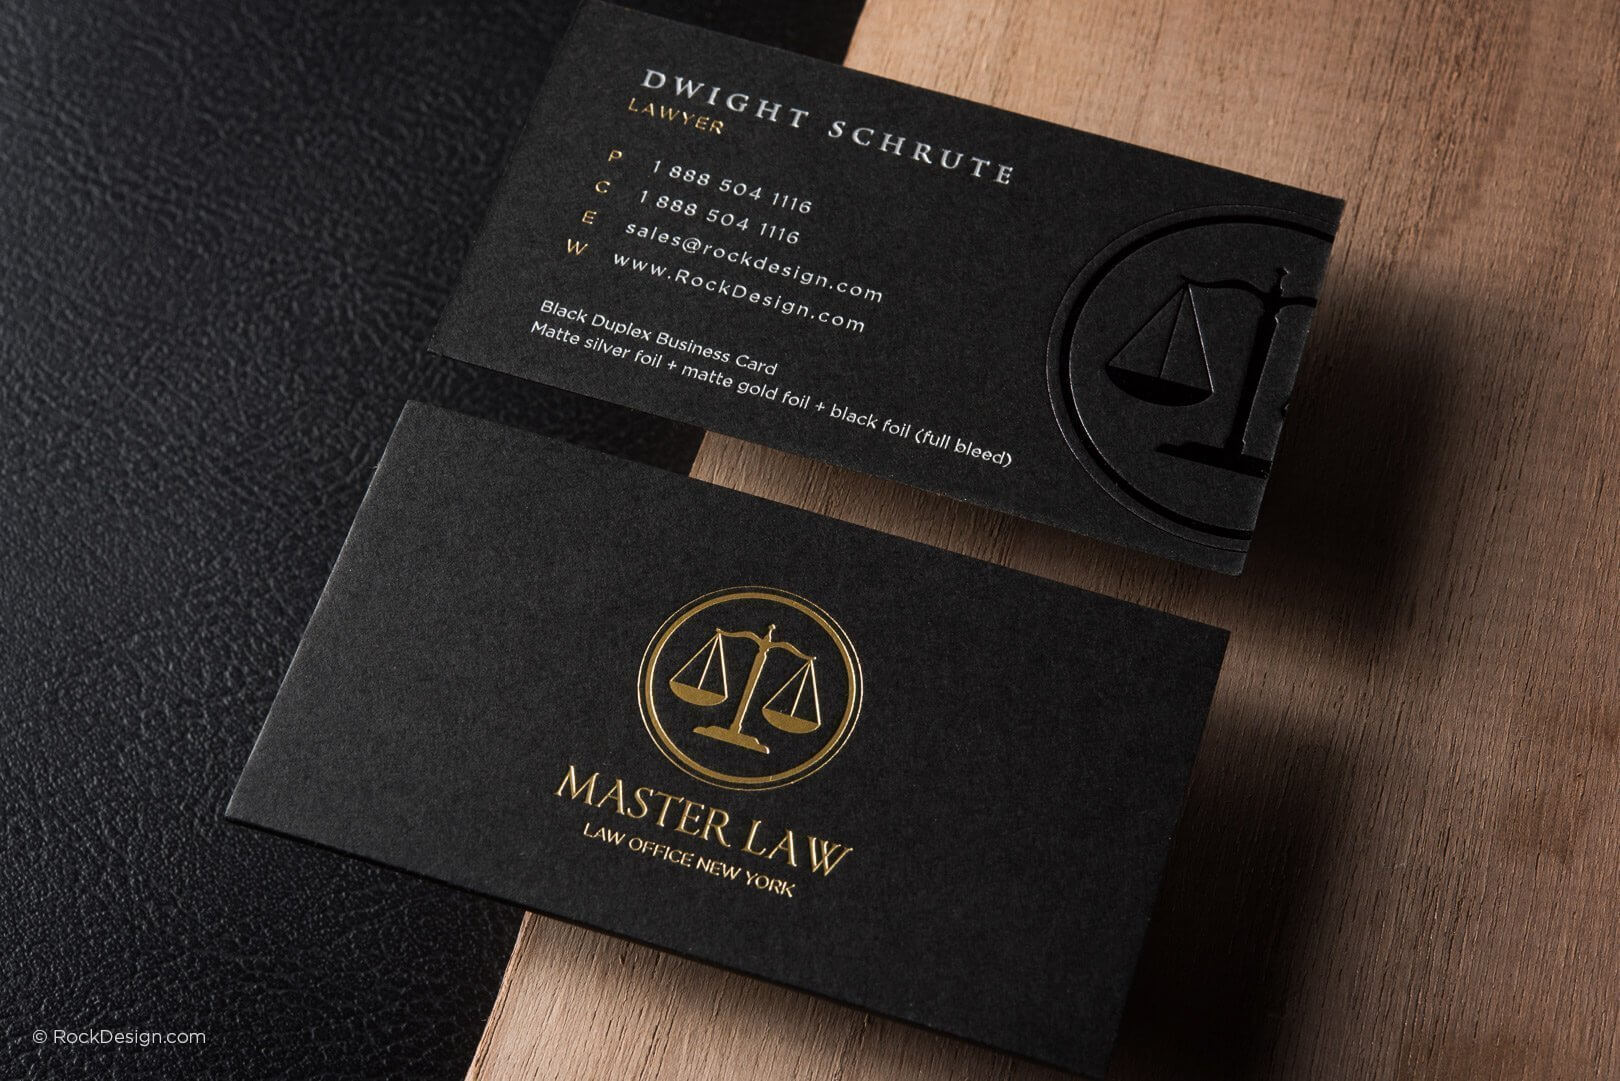 Free Lawyer Business Card Template | Rockdesign Regarding Lawyer Business Cards Templates